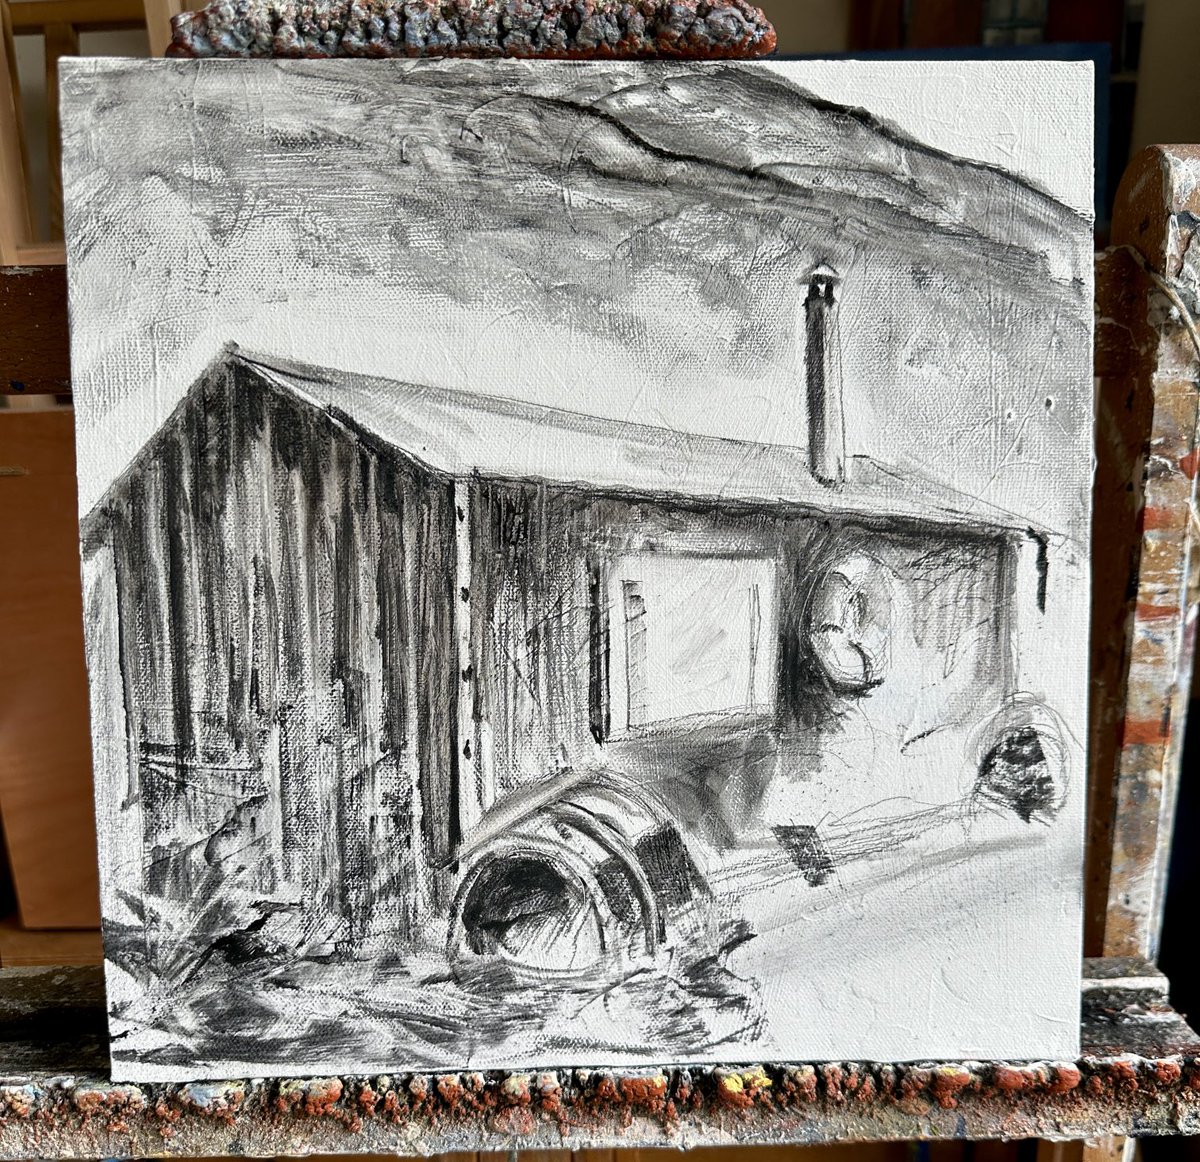 On my #easel #WIP #charcoal drawing of #Fisher #hut at #PortMulgrave #YorkshireCoast